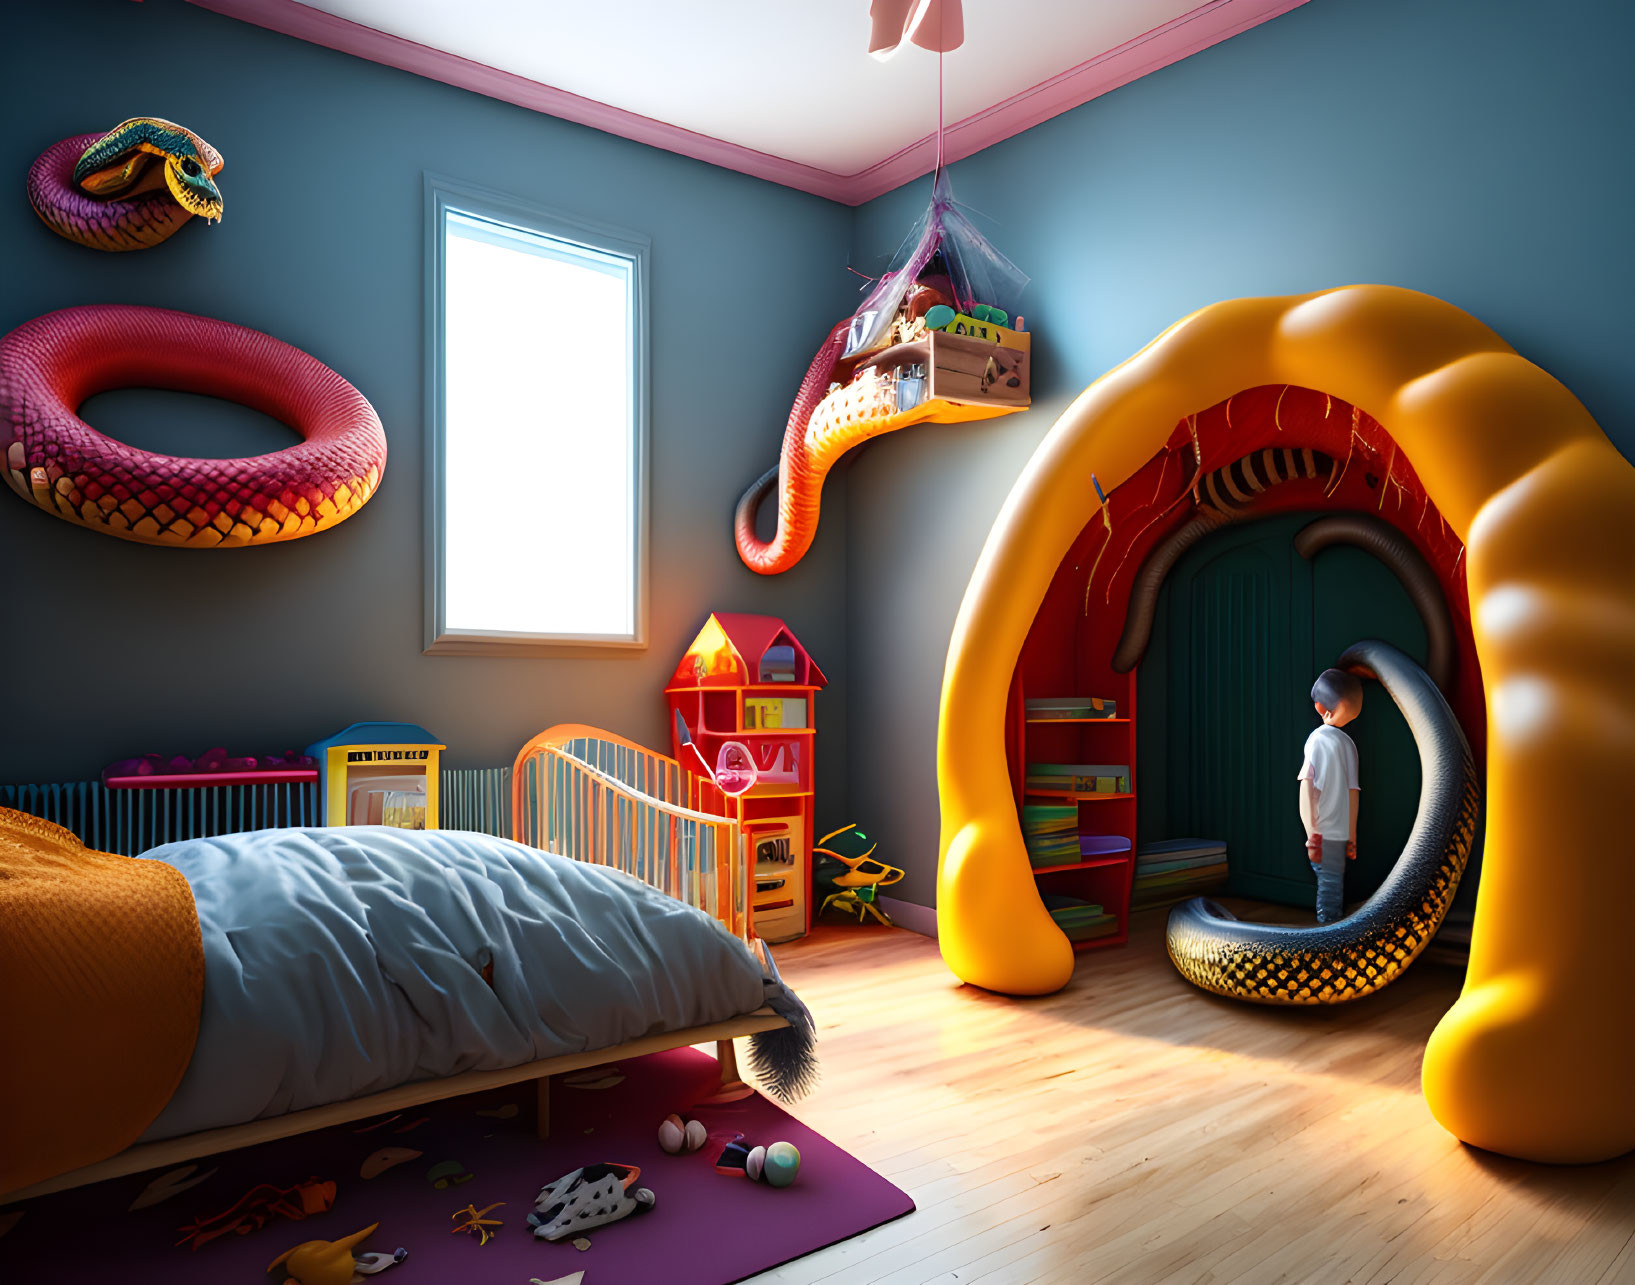 Colorful Snake-Themed Child's Bedroom Decor and Playful Design